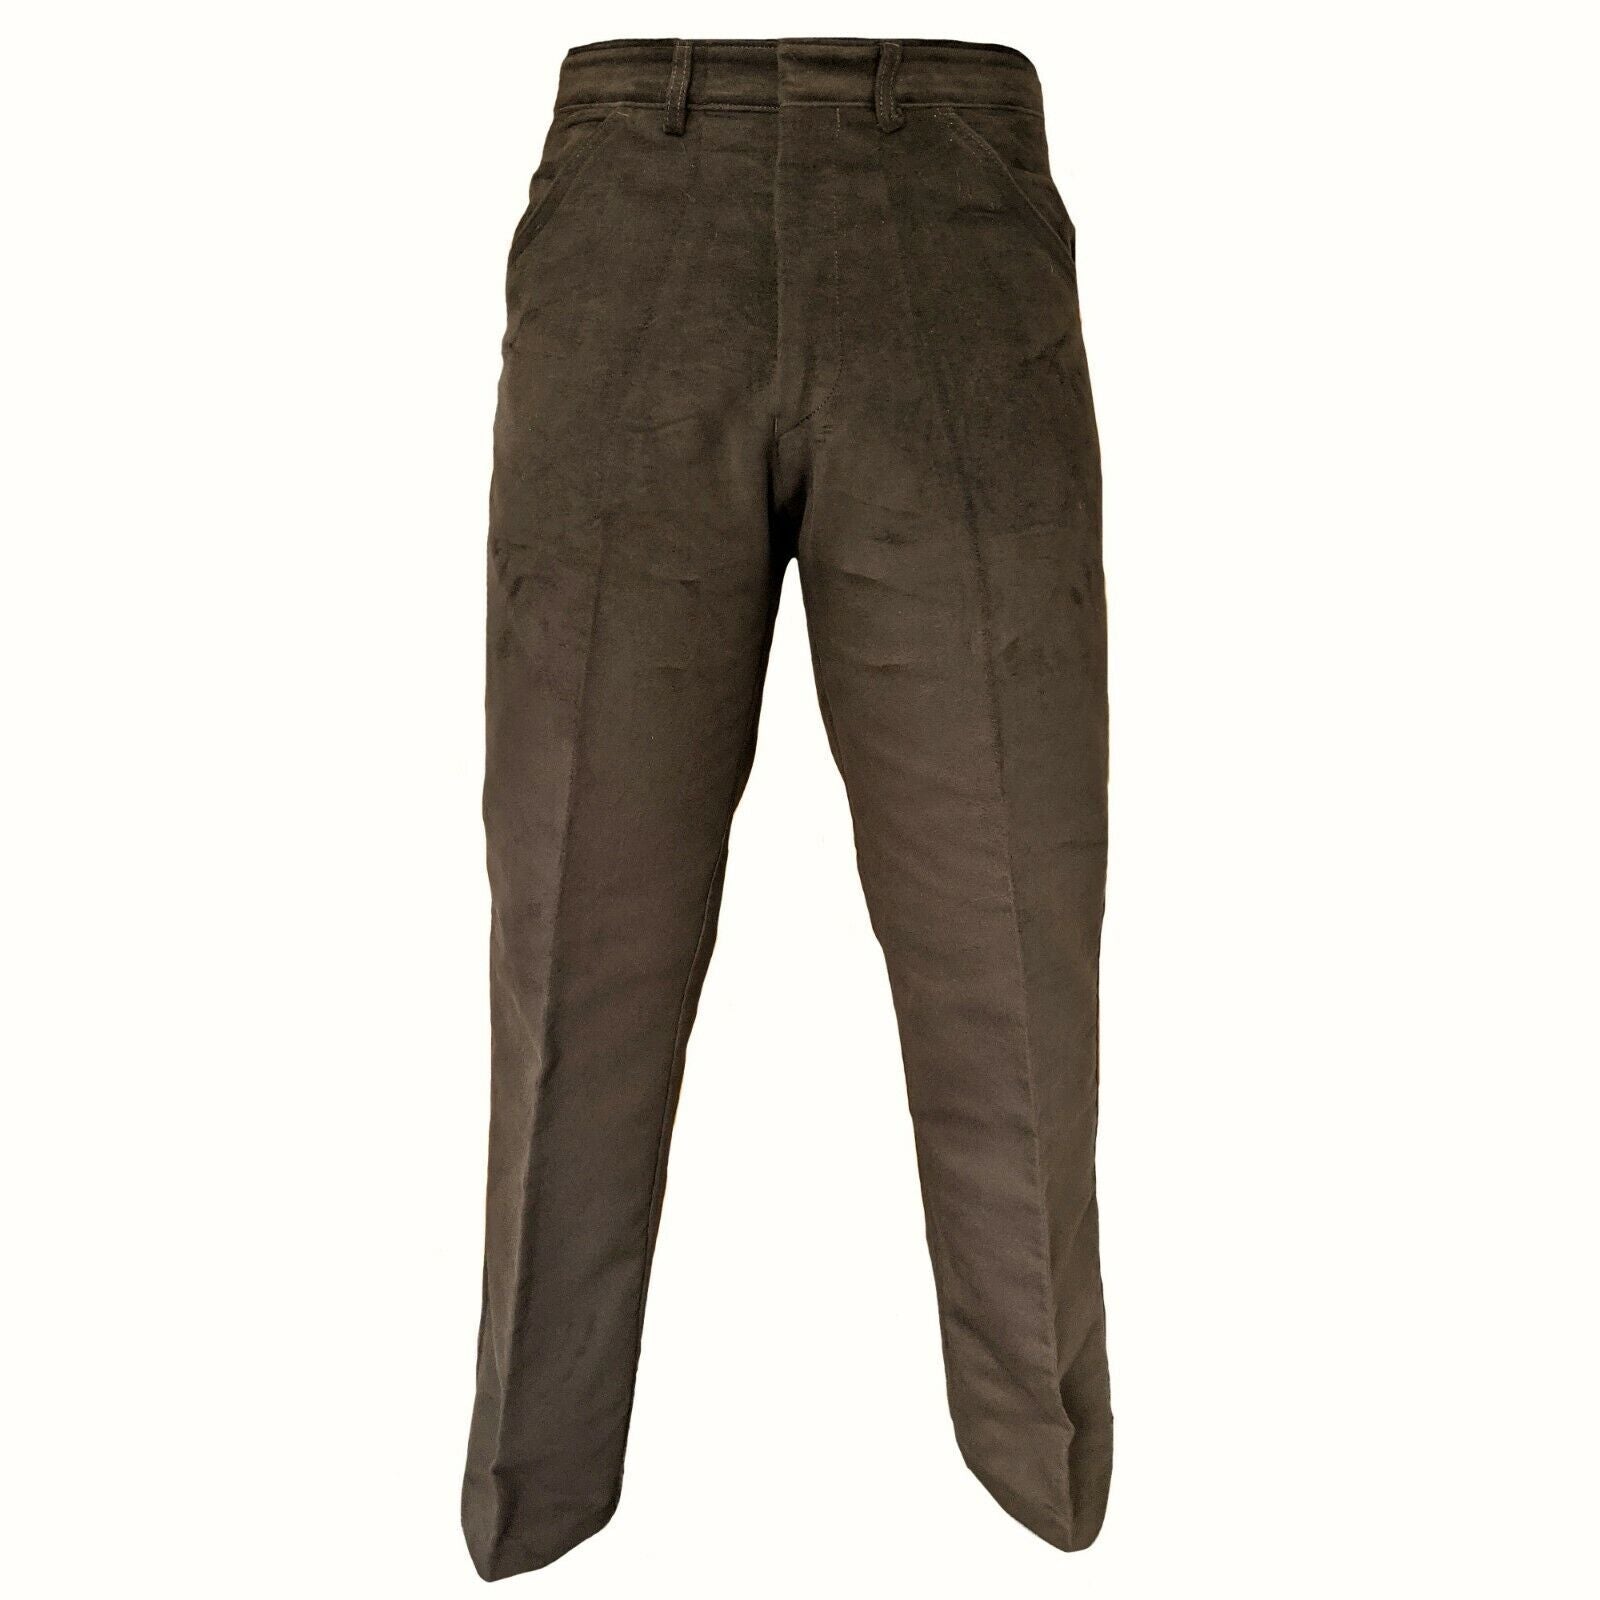 Men's Trousers for Country Men